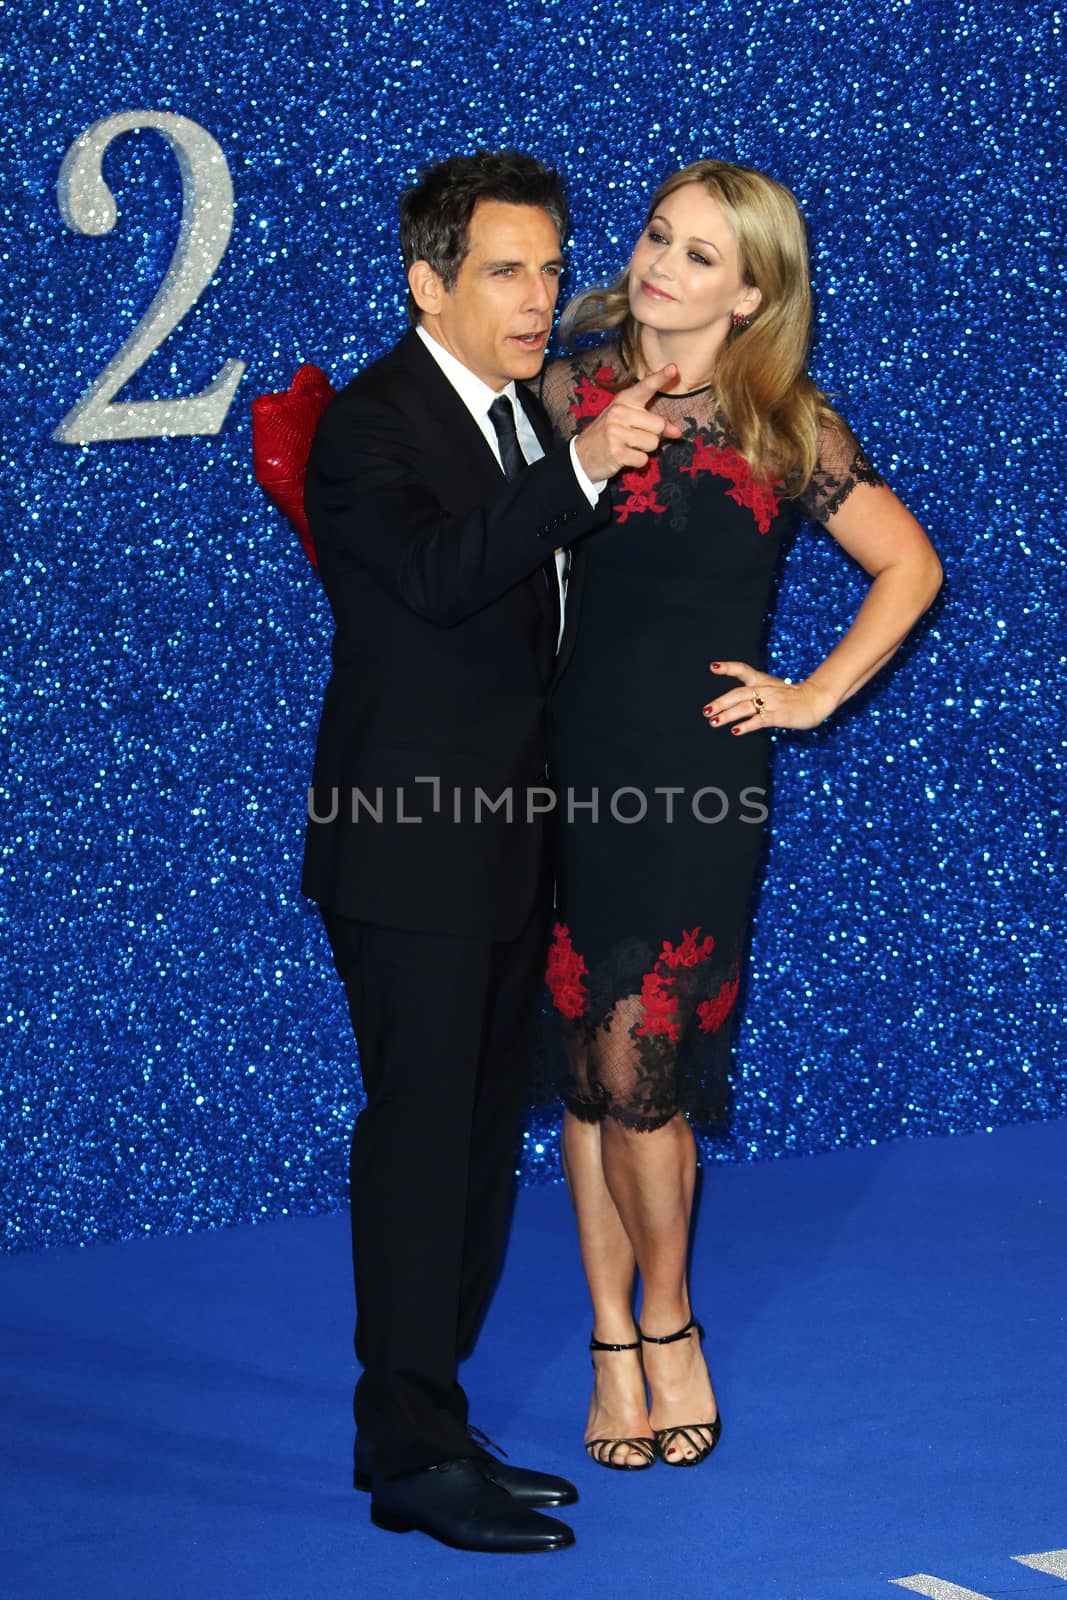 UK, London: Ben Stiller and Christine Taylor arrive on the blue carpet at Leicester Square in London on February 4, 2016 for a fashionable screening of Zoolander No. 2, the long-awaited sequel to Stiller's trademark hit.